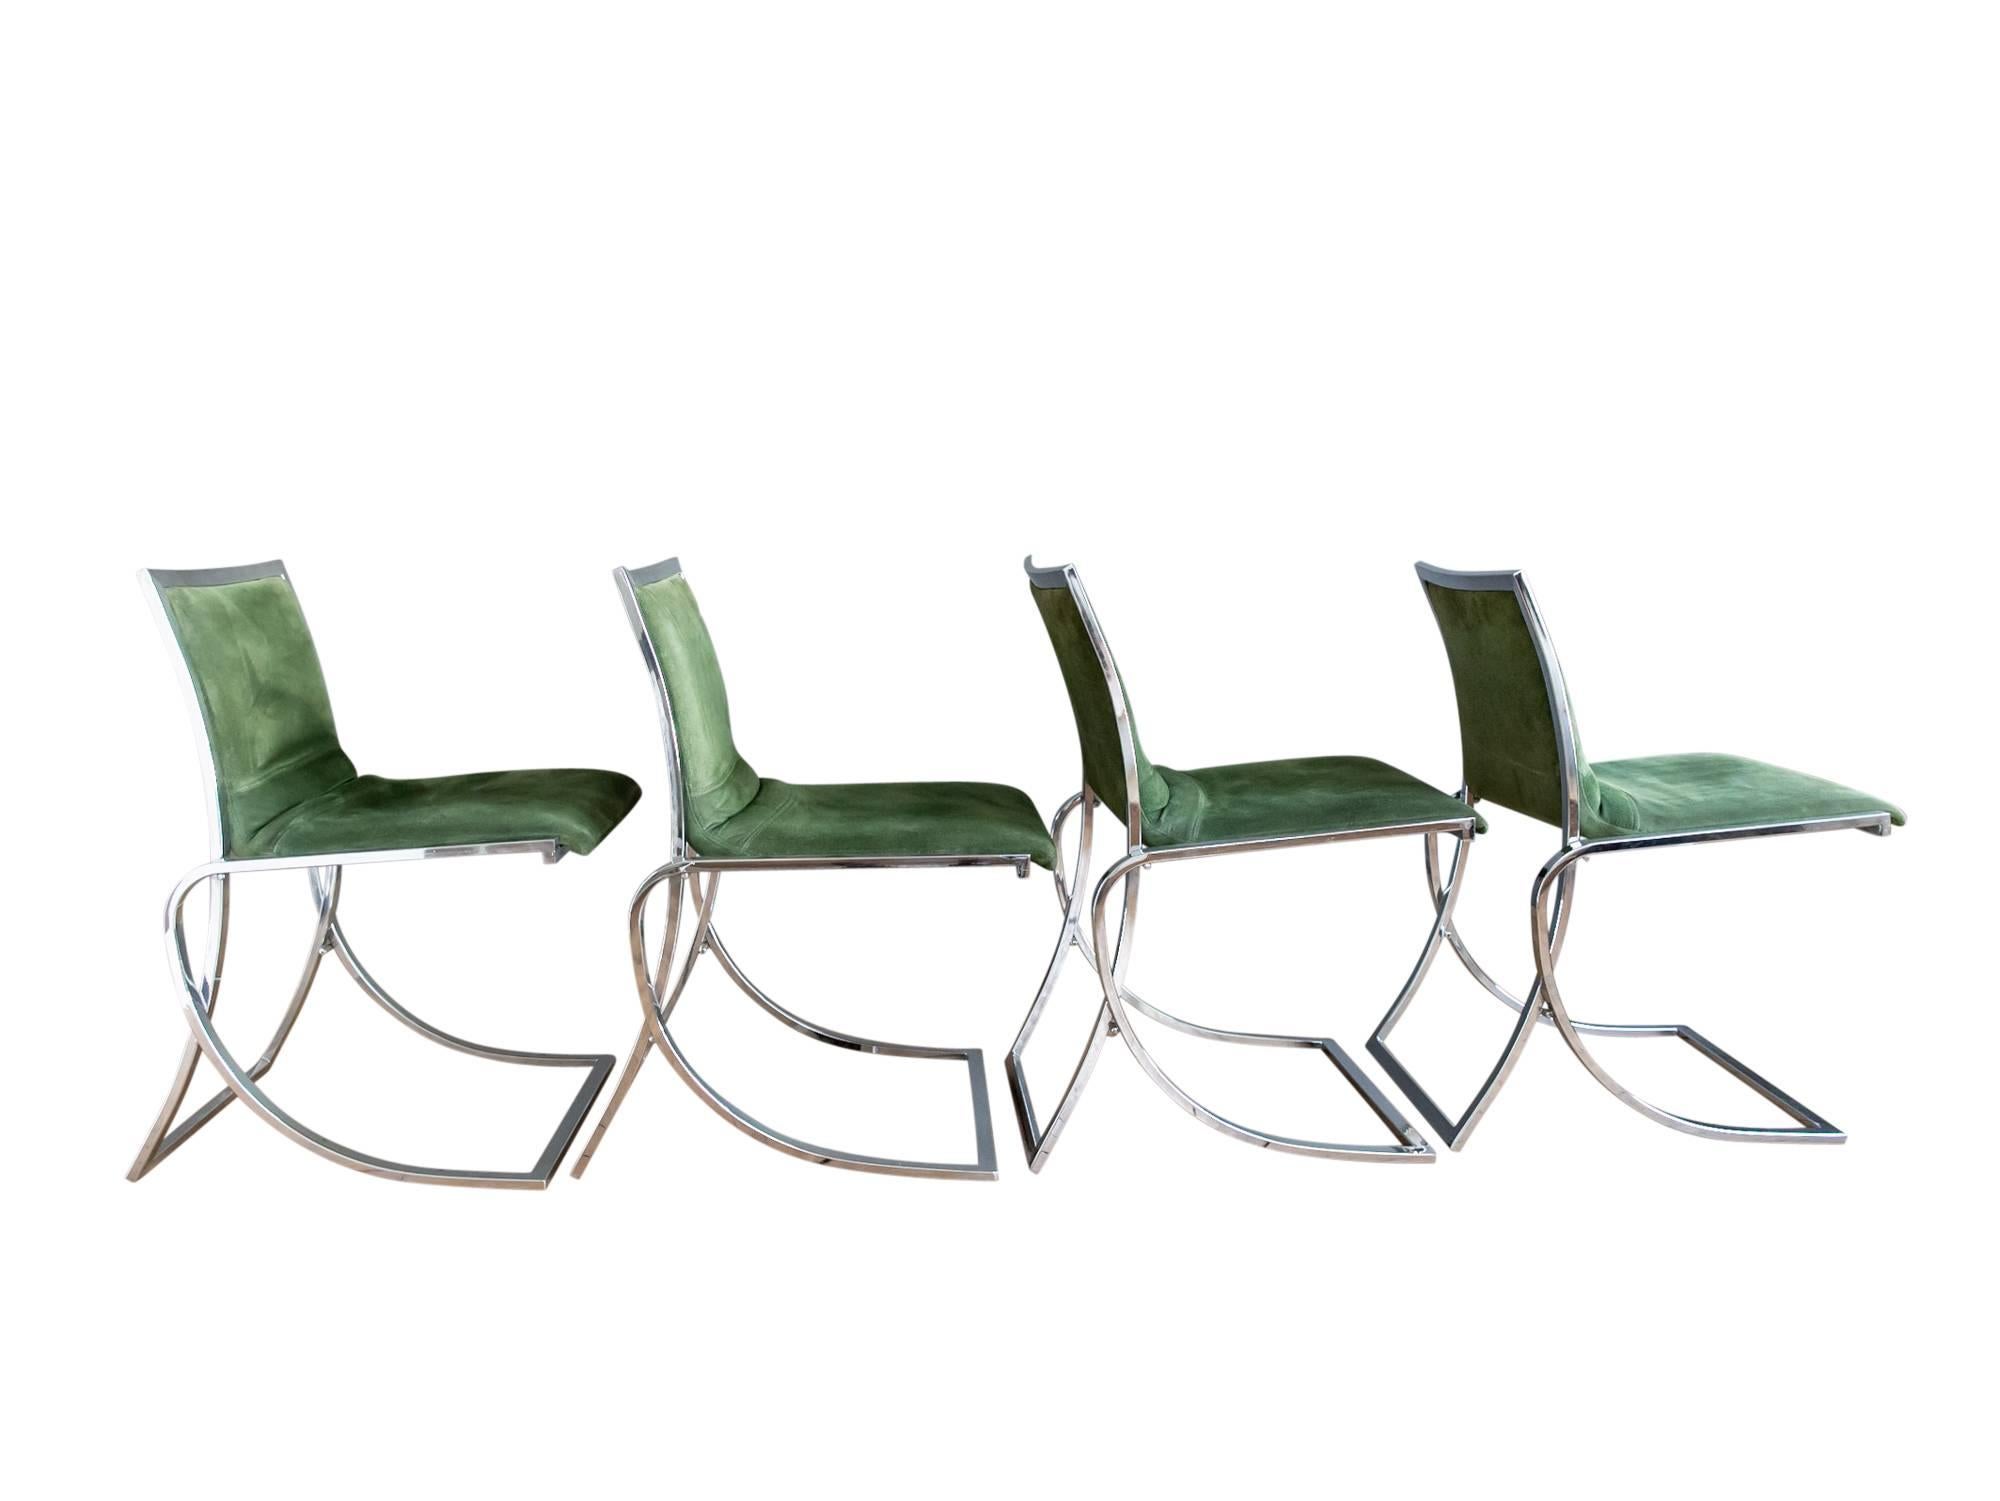 A stylish set of four chrome dining chairs by Maison Jansen, circa 1970s. Featuring heavy cantilevered frames with original emerald green suede upholstery. Well-constructed and in excellent vintage condition. Suede was recently conditioned and